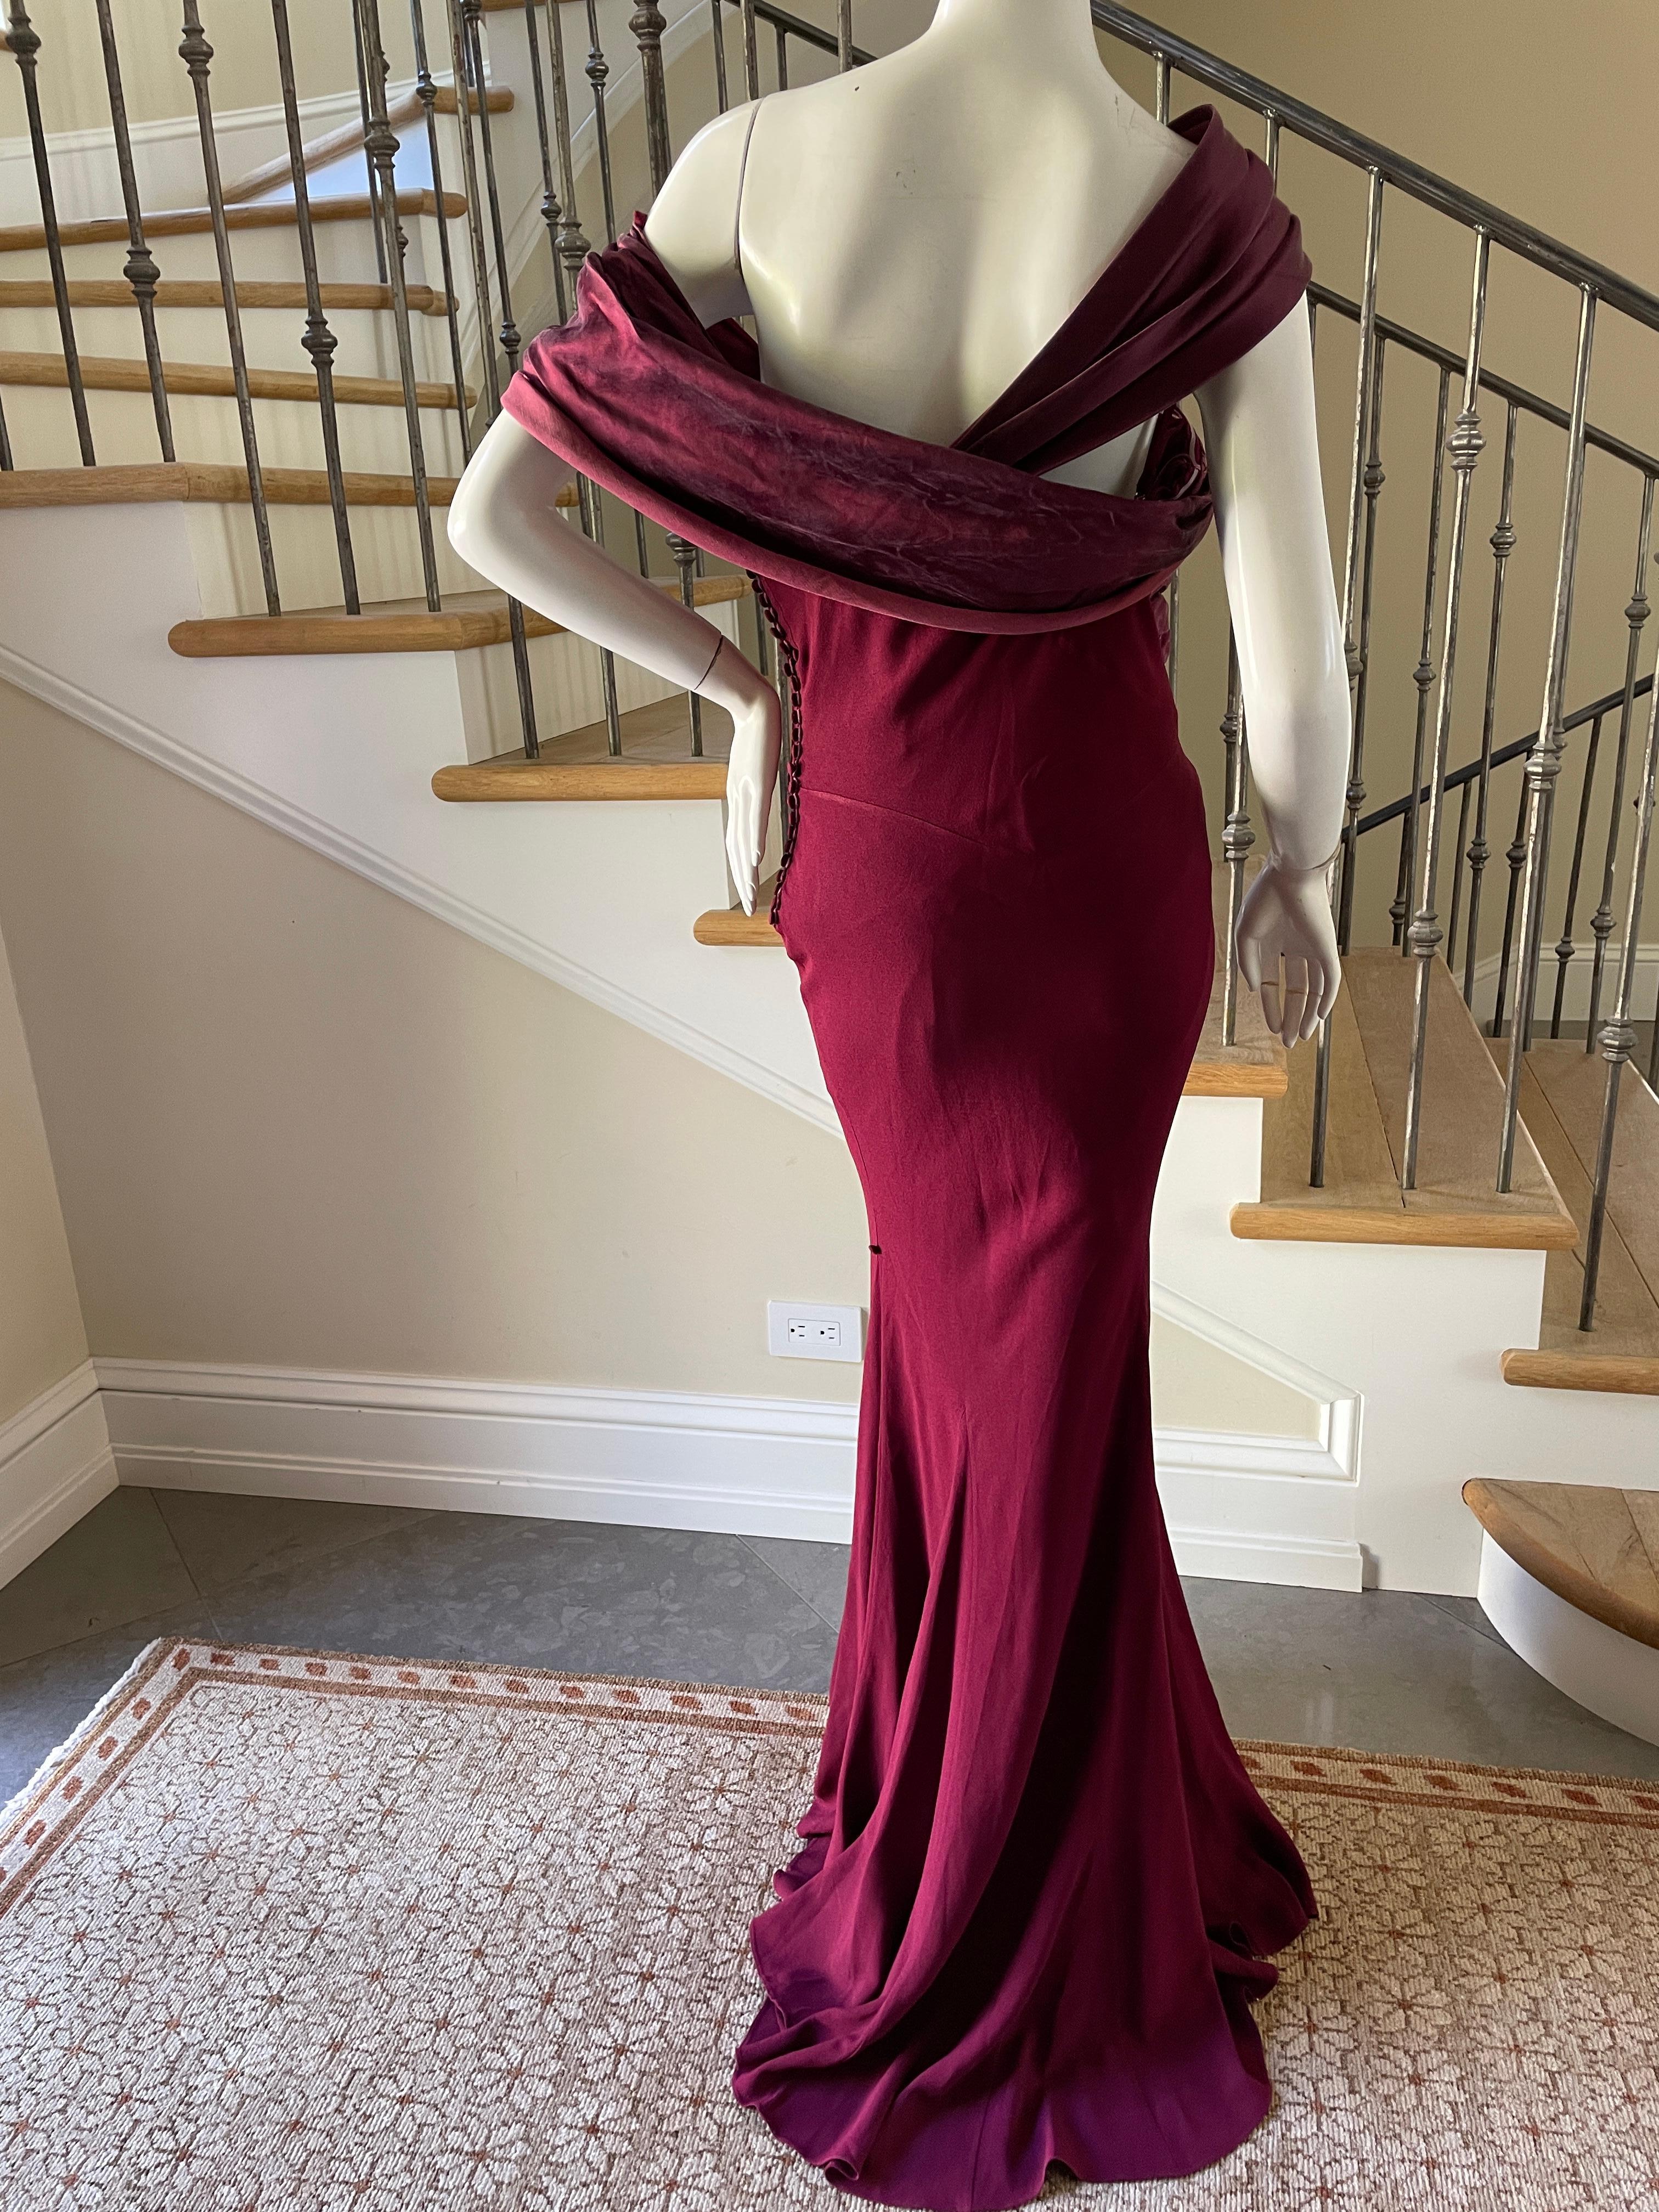 Christian Dior by John Galliano Burgundy Red Draped Evening Dress For Sale 7